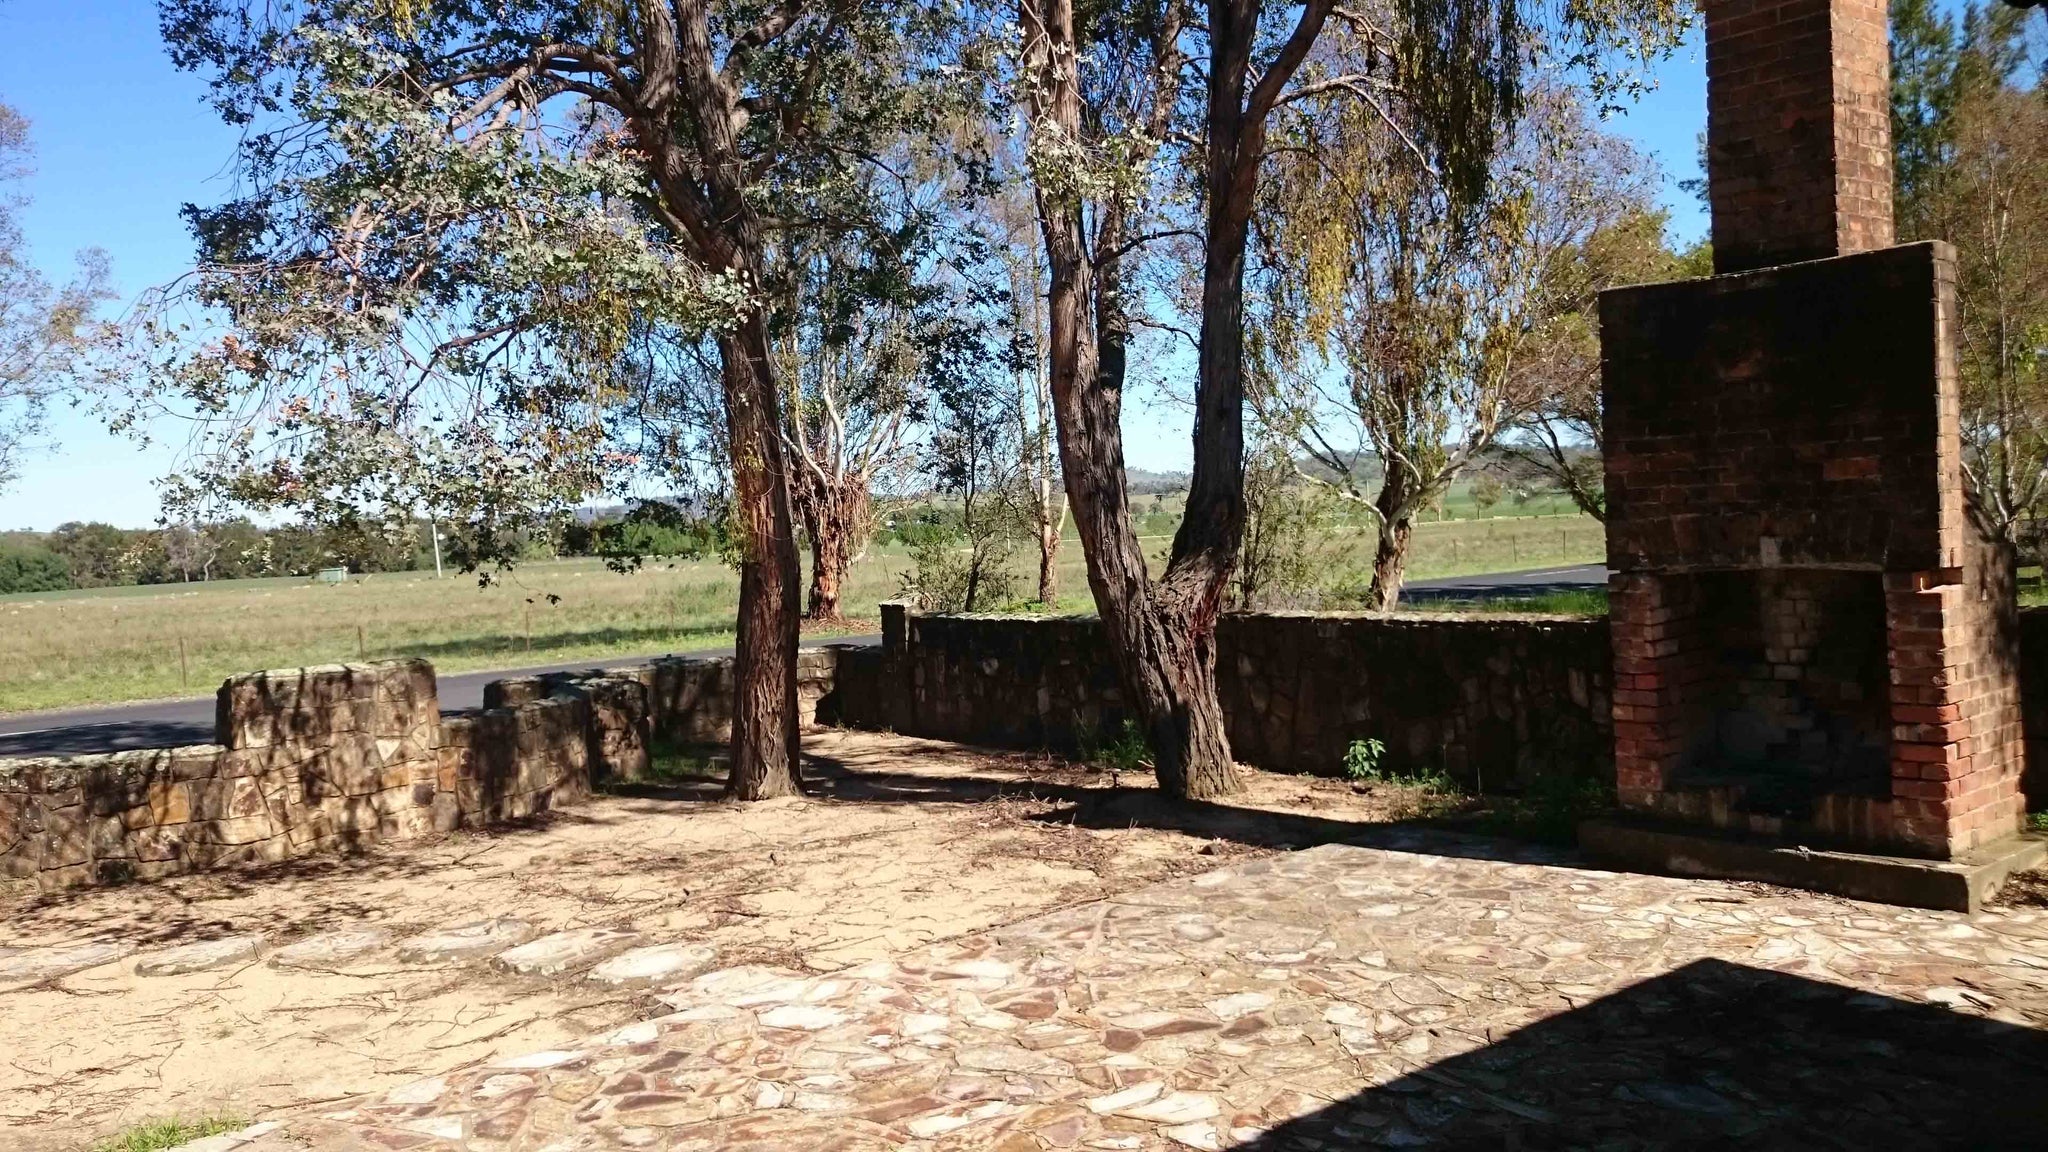 One Town at a Time, Kieran Wicks, Living Art Lifestyle Eurunderee mid West Region New South Wales, Henry Lawsons Childhood Home known as Pipeclay, Vineyards region near Mudgee. Pioneer Ruins, Louisa Lawson. 